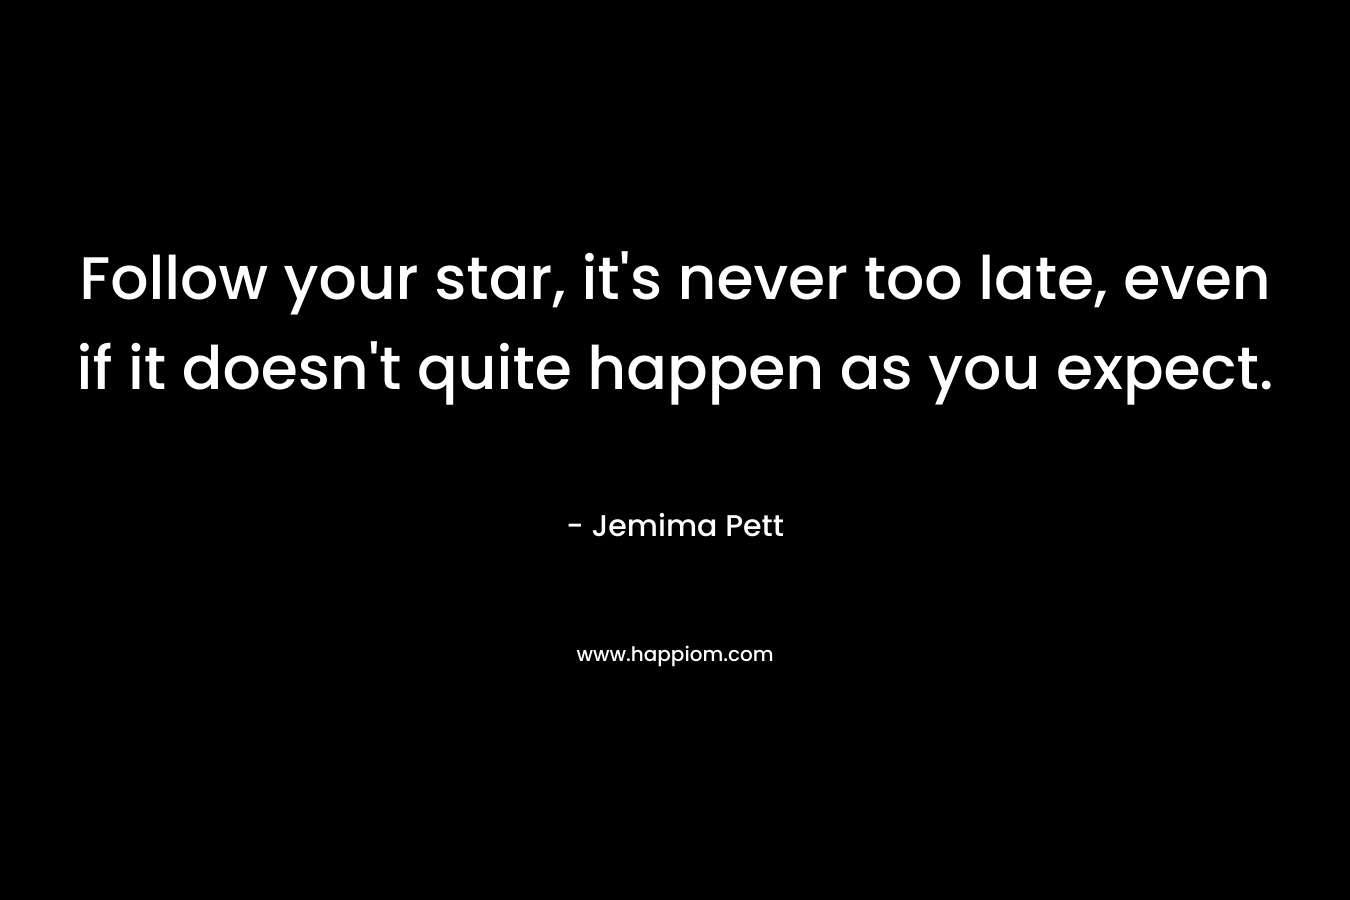 Follow your star, it's never too late, even if it doesn't quite happen as you expect.